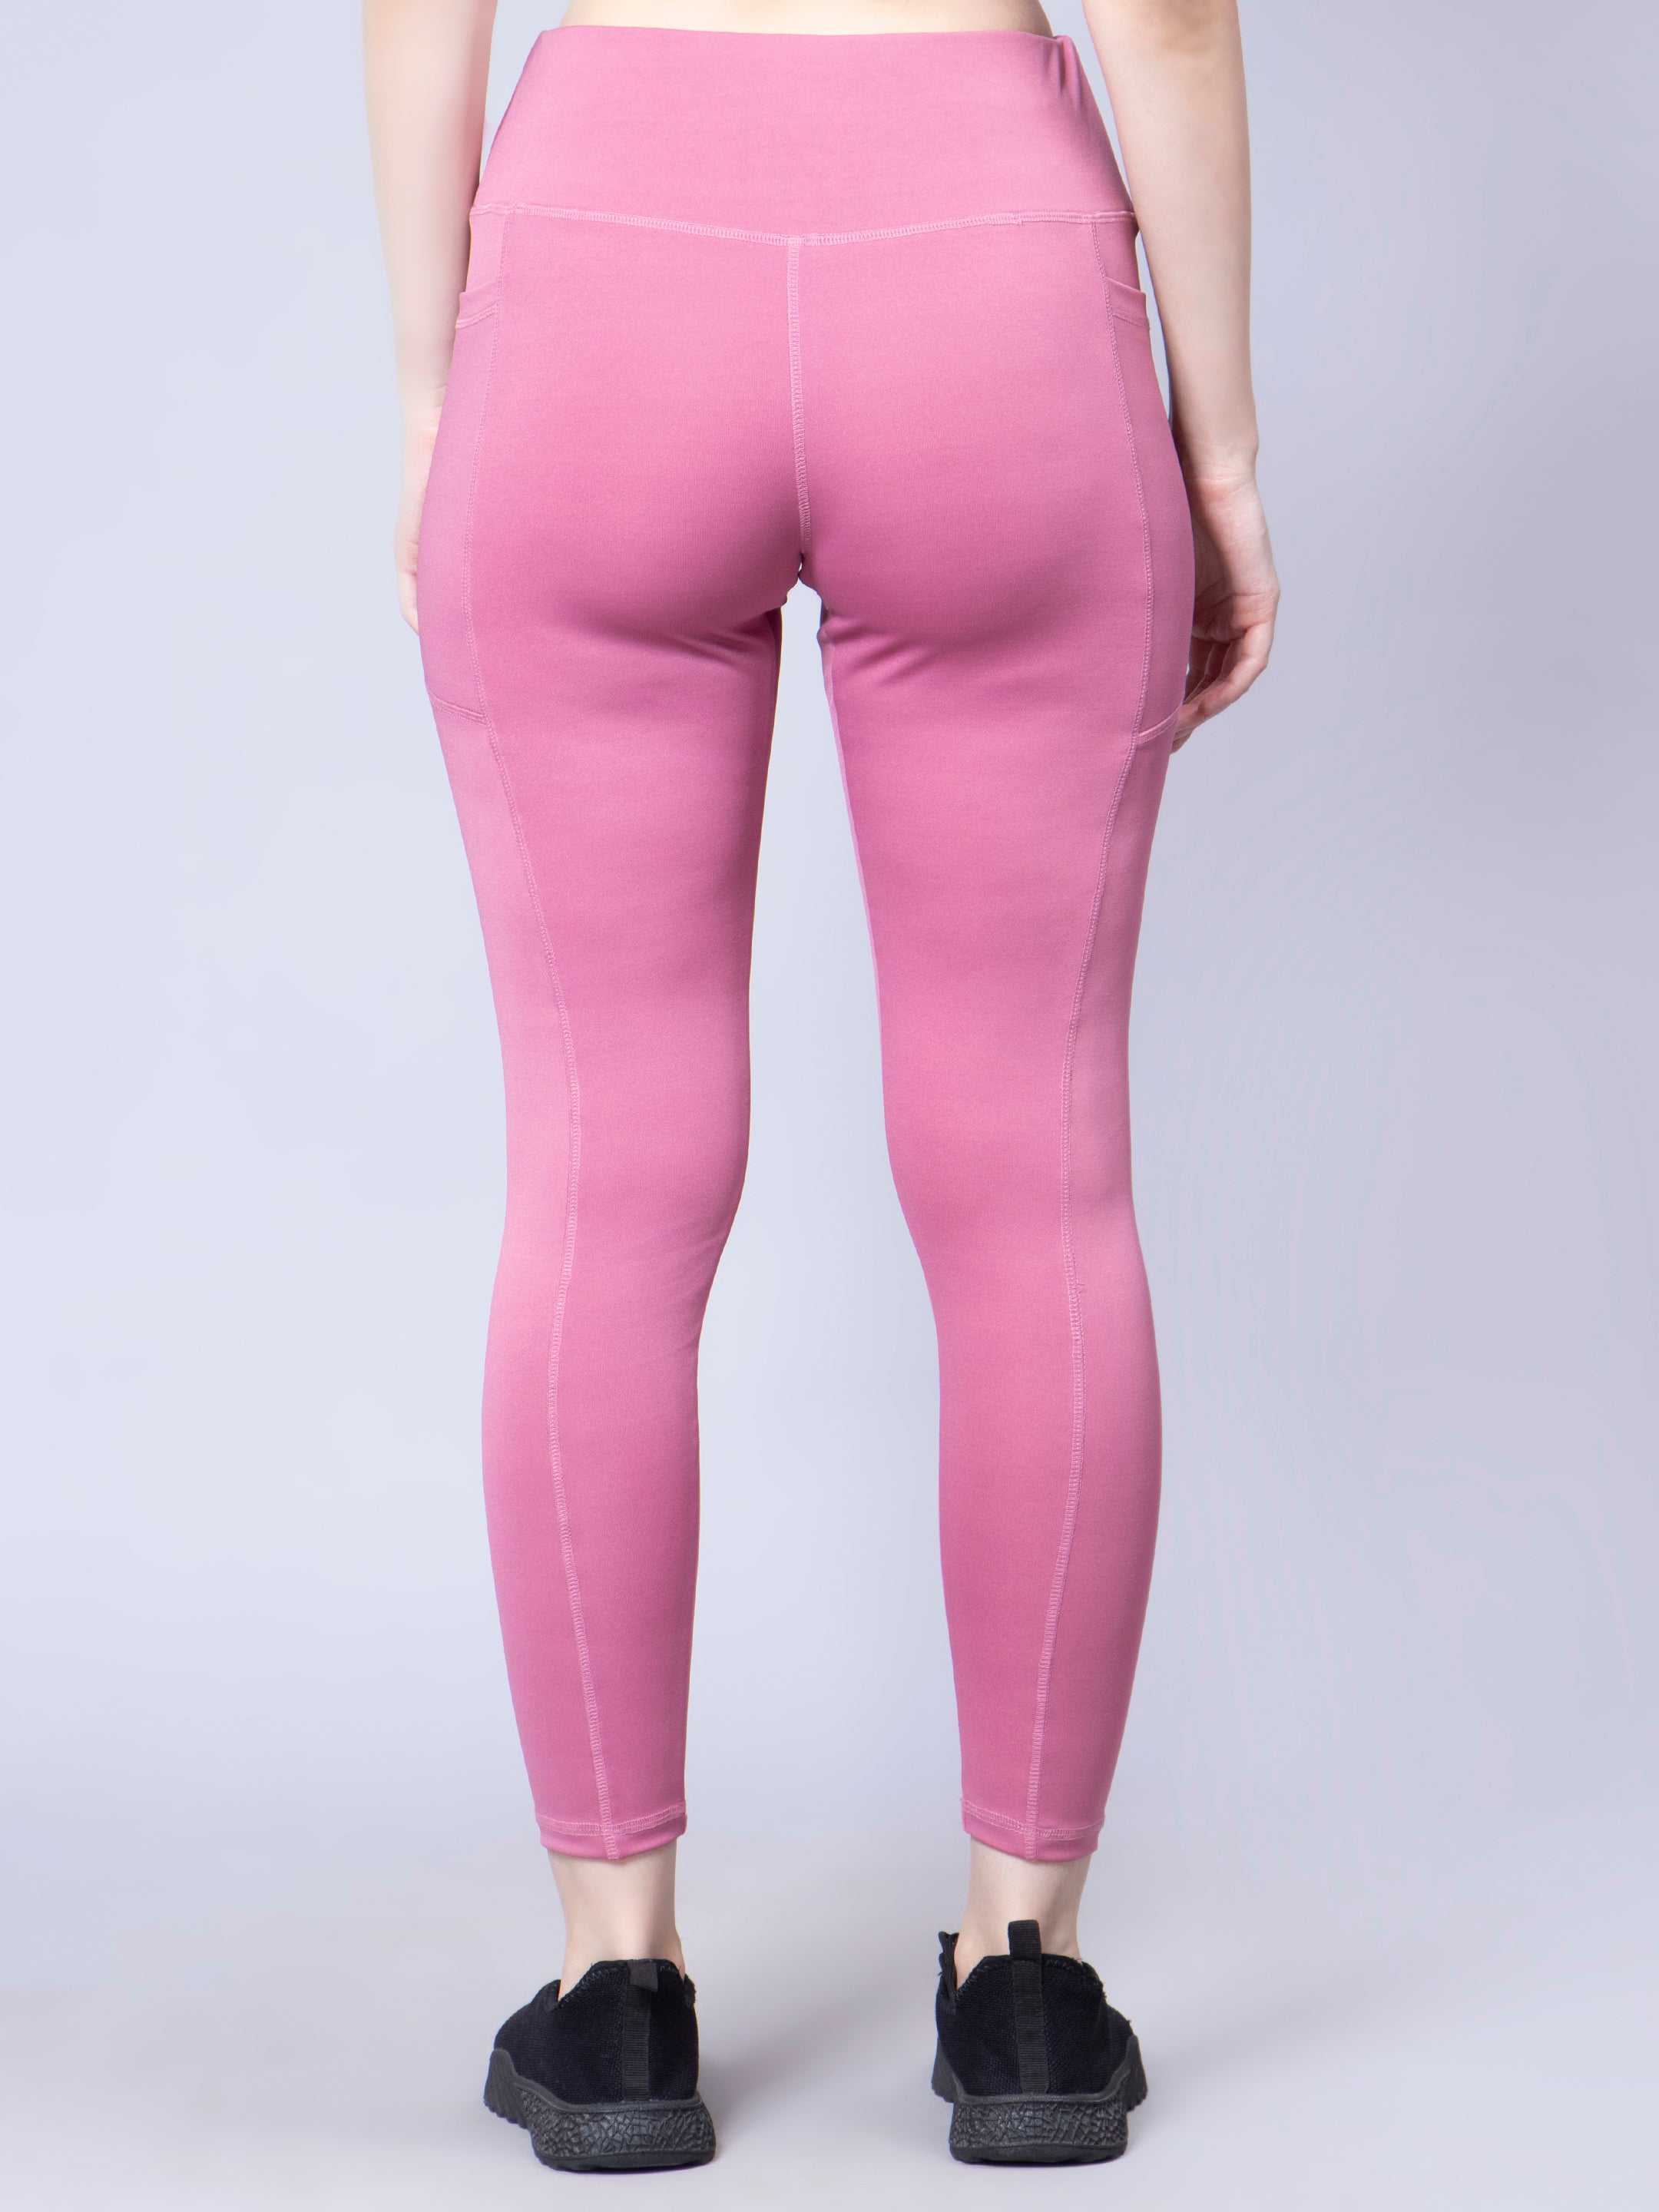 Buy Republic Of Curves® Baby Pink Yoga Pants (Gym Tights) | Workout Leggings  for Women | Gym Leggings | Women at Leisure at Amazon.in